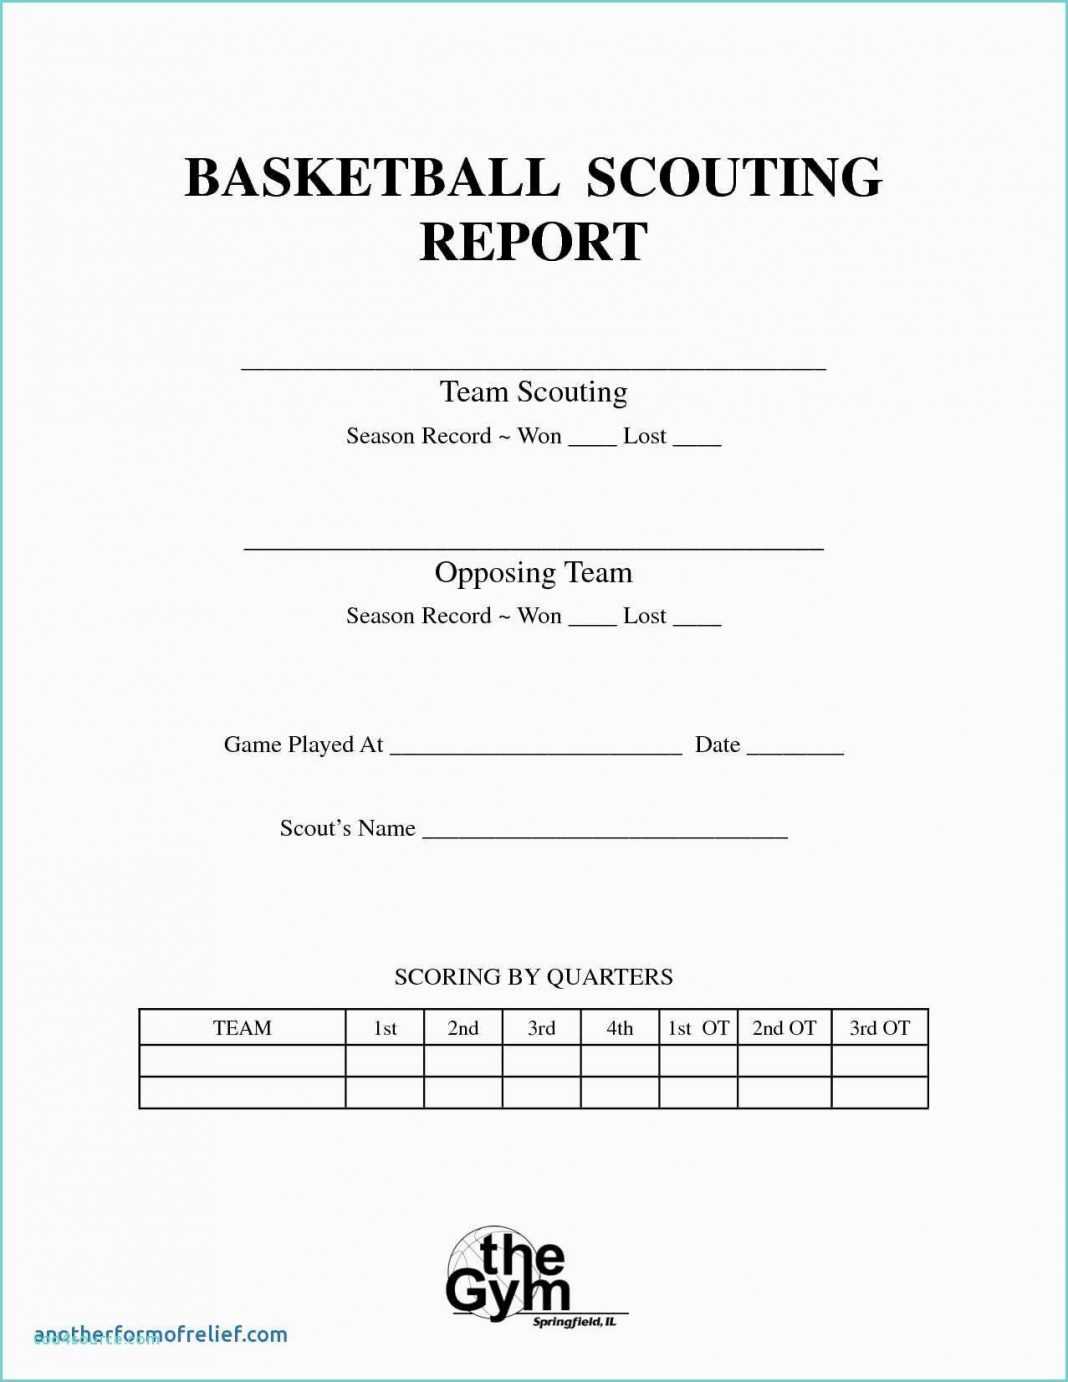 Report Examples Gamechart21 College Basketball Scouting Intended For Scouting Report Template Basketball